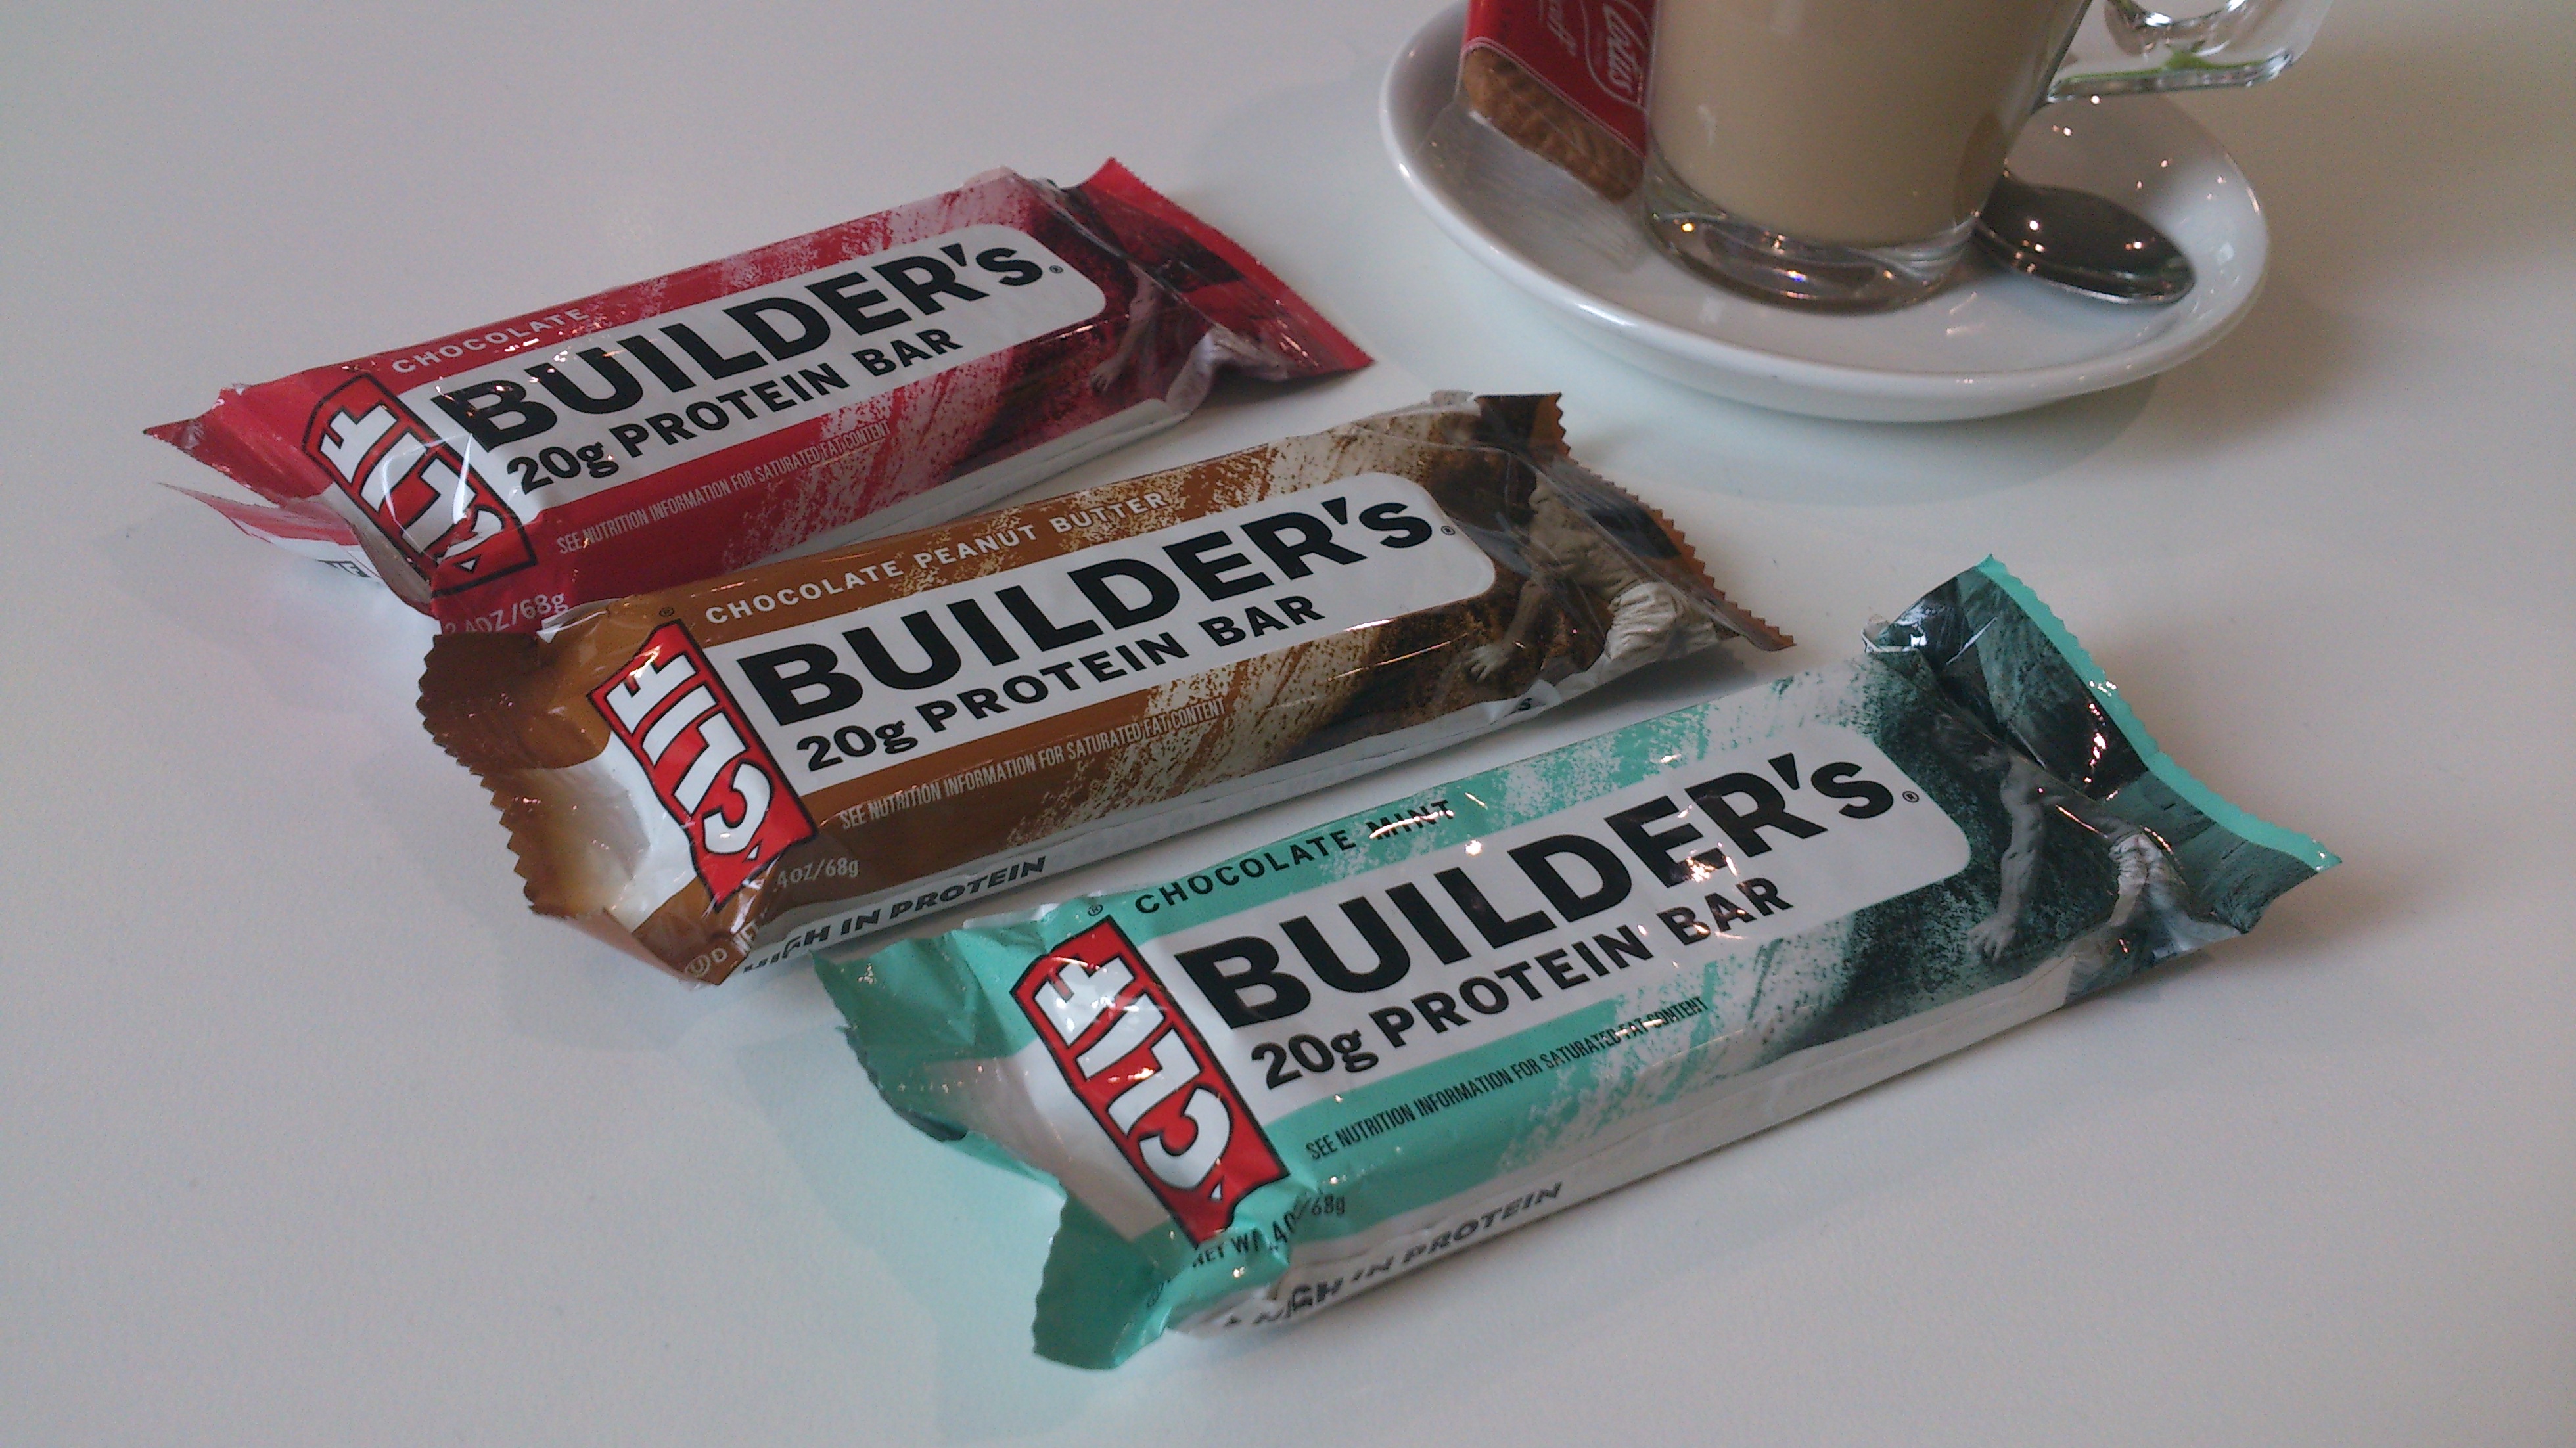 Clif brings out a protein bar called Clif Builder’s